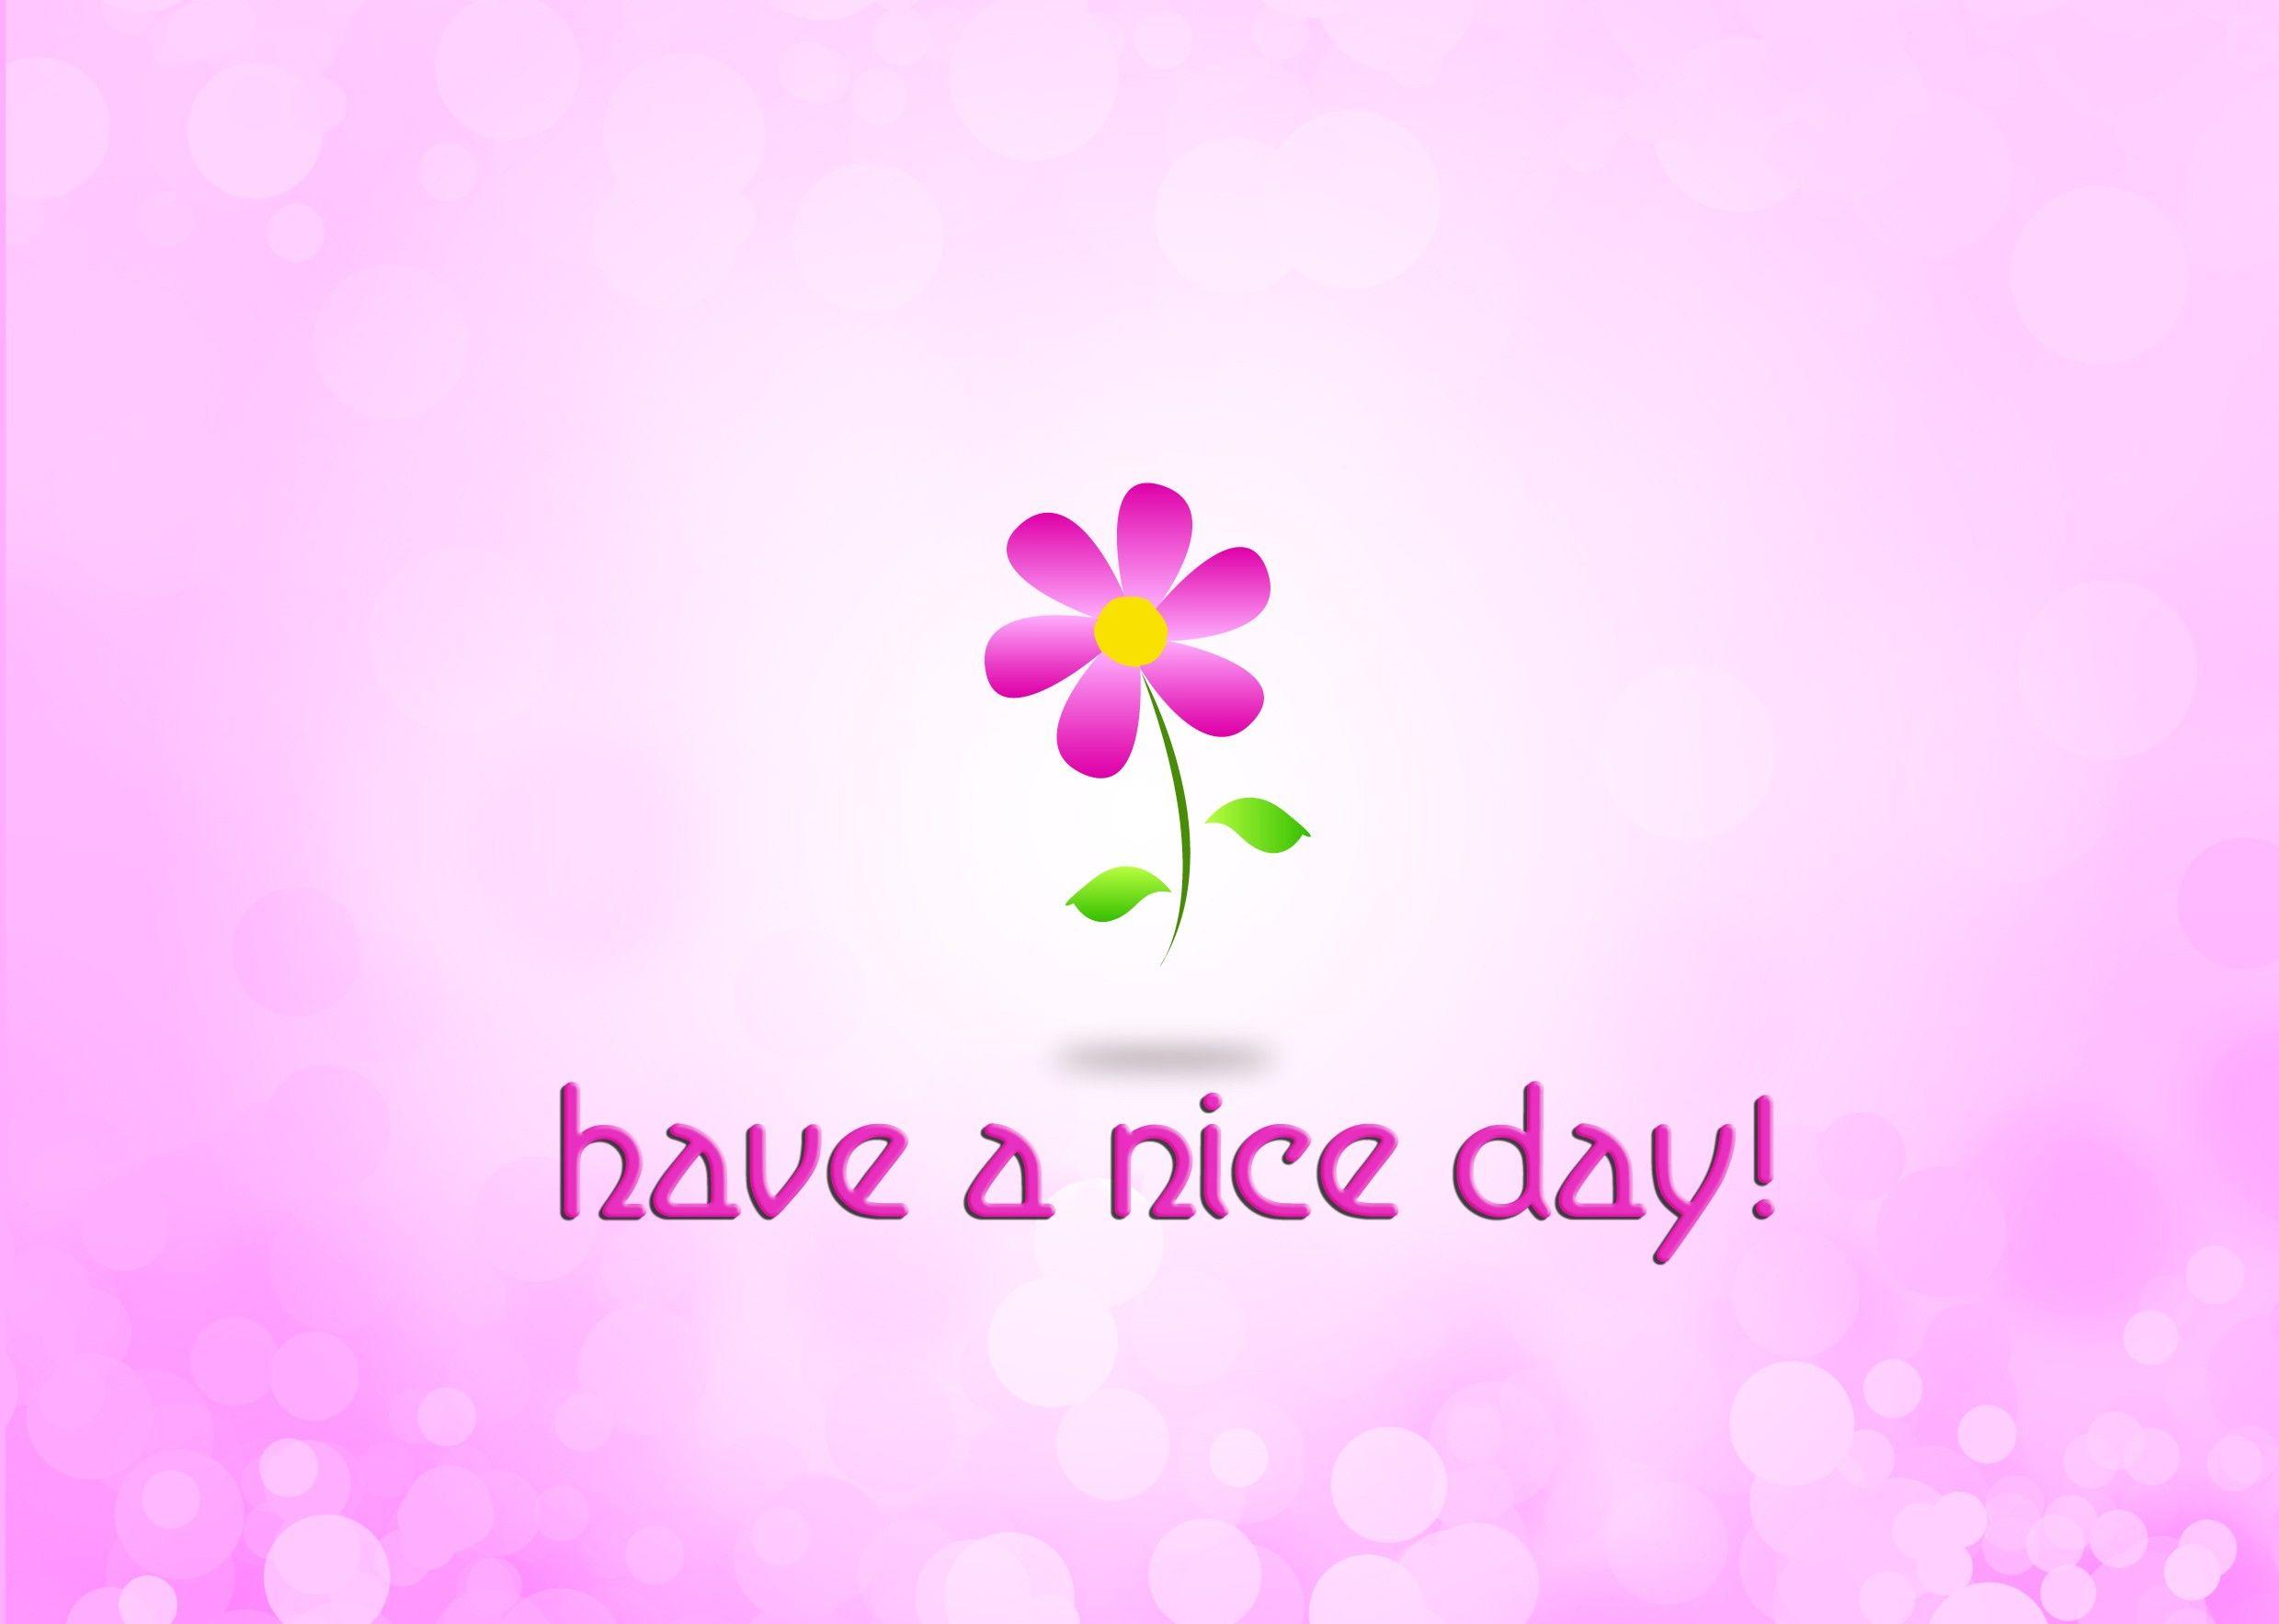 Have a nice day // wallpaper, backgrounds